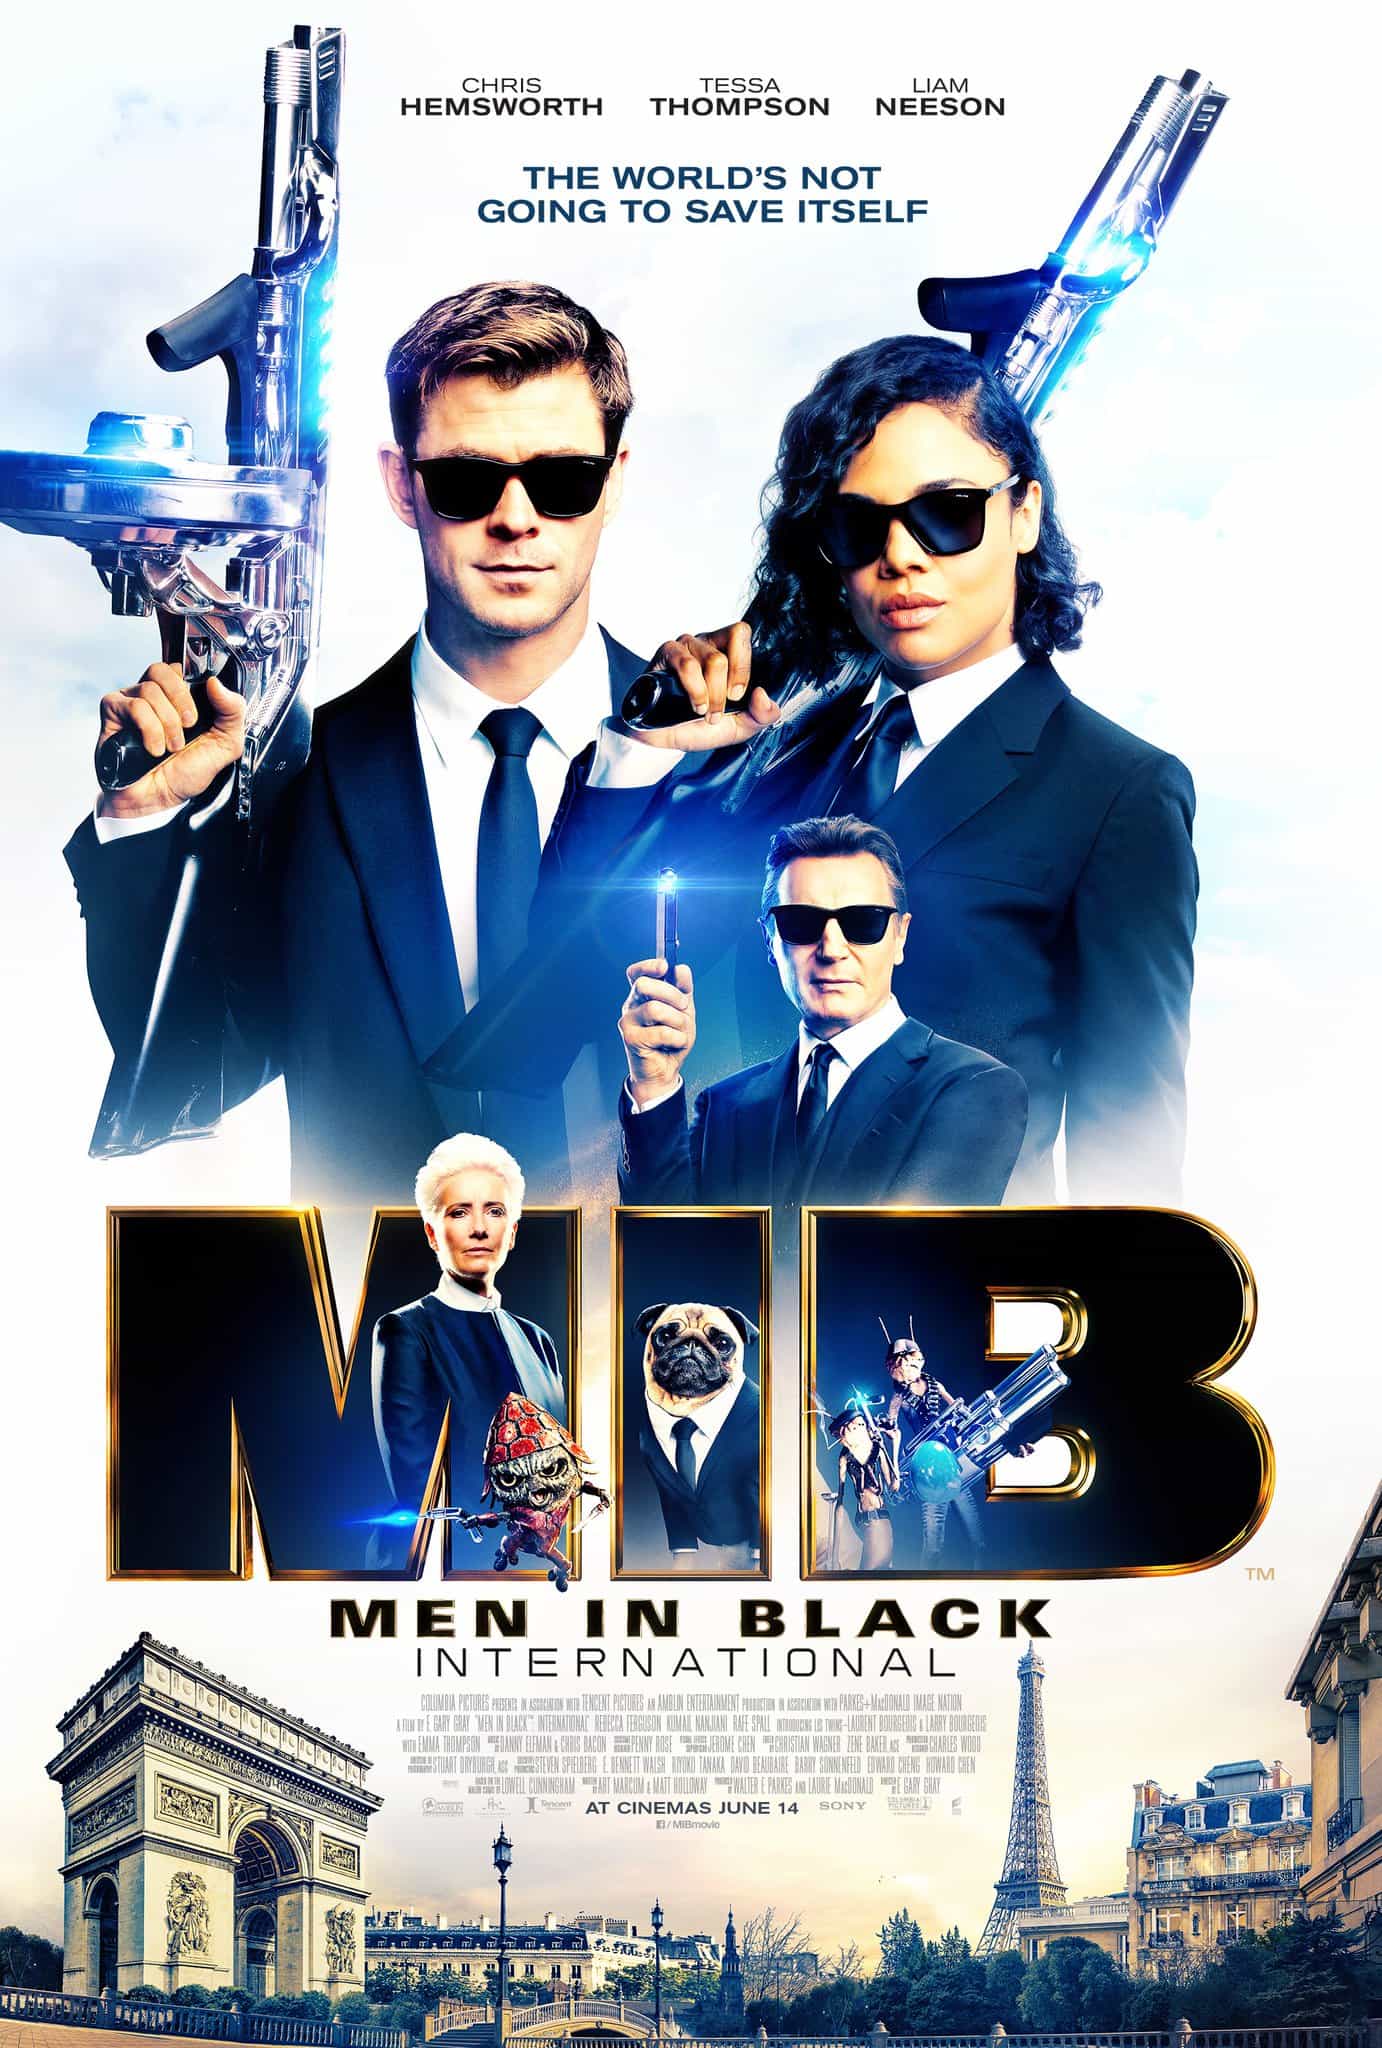 Men In Black: International gets a 12A age rating for moderate violence, threat, sex references, language